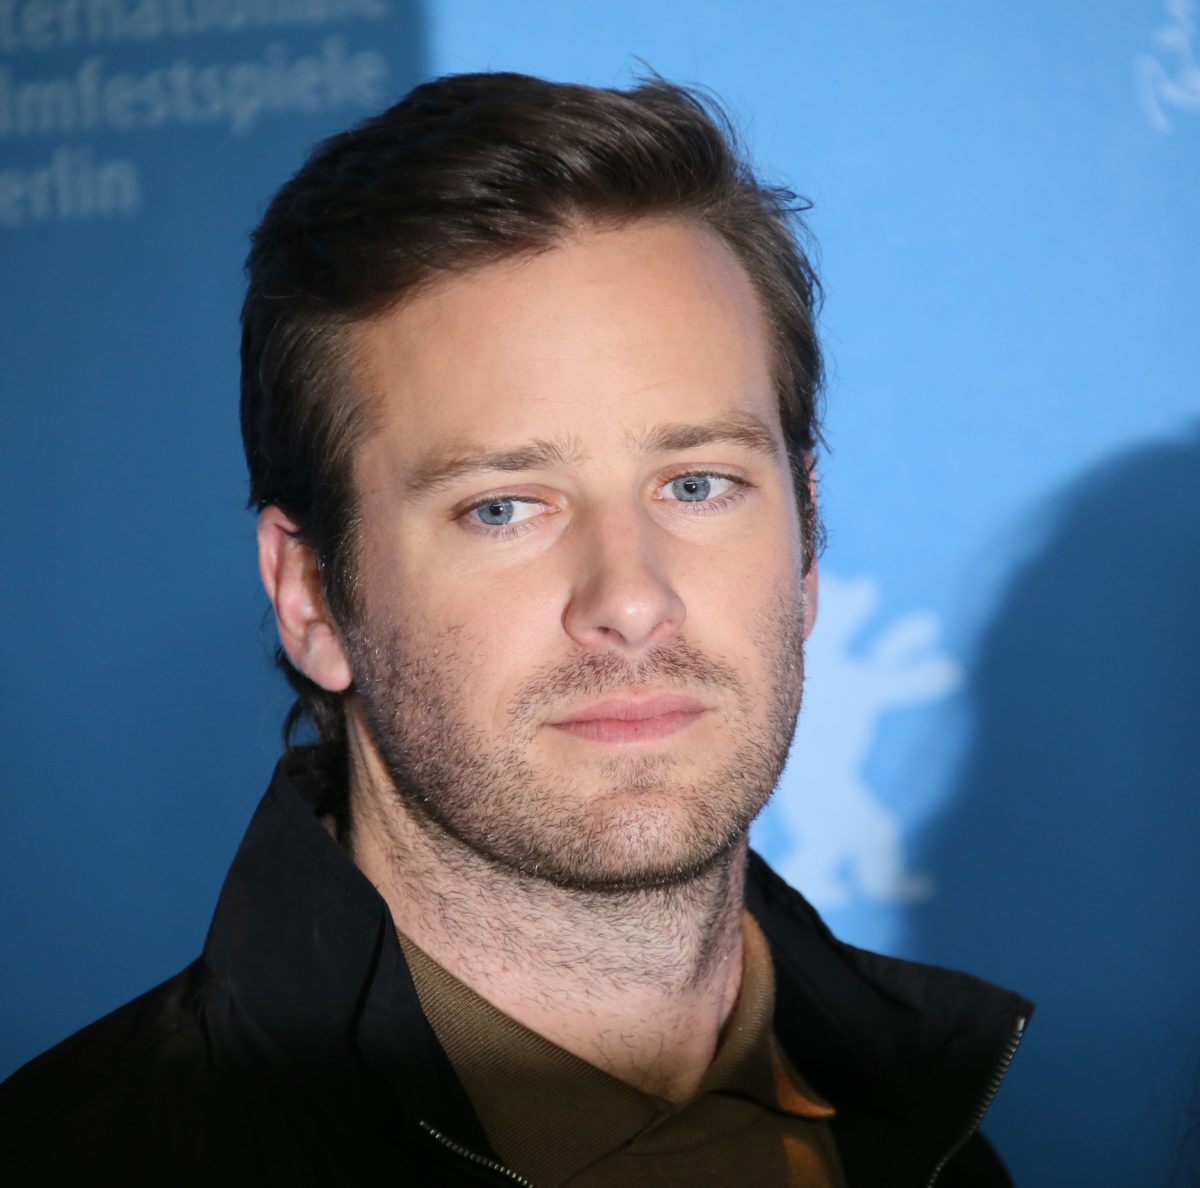 Armie Hammer And The Cannibal Scandal: He Wanted To 'Barbecue And Eat Me' | Armie Hammer is in hot water after he was allegedly outed as a cannibal --- causing him to be recast in the upcoming movie "Shotgun Wedding" opposite of Jennifer Lopez.